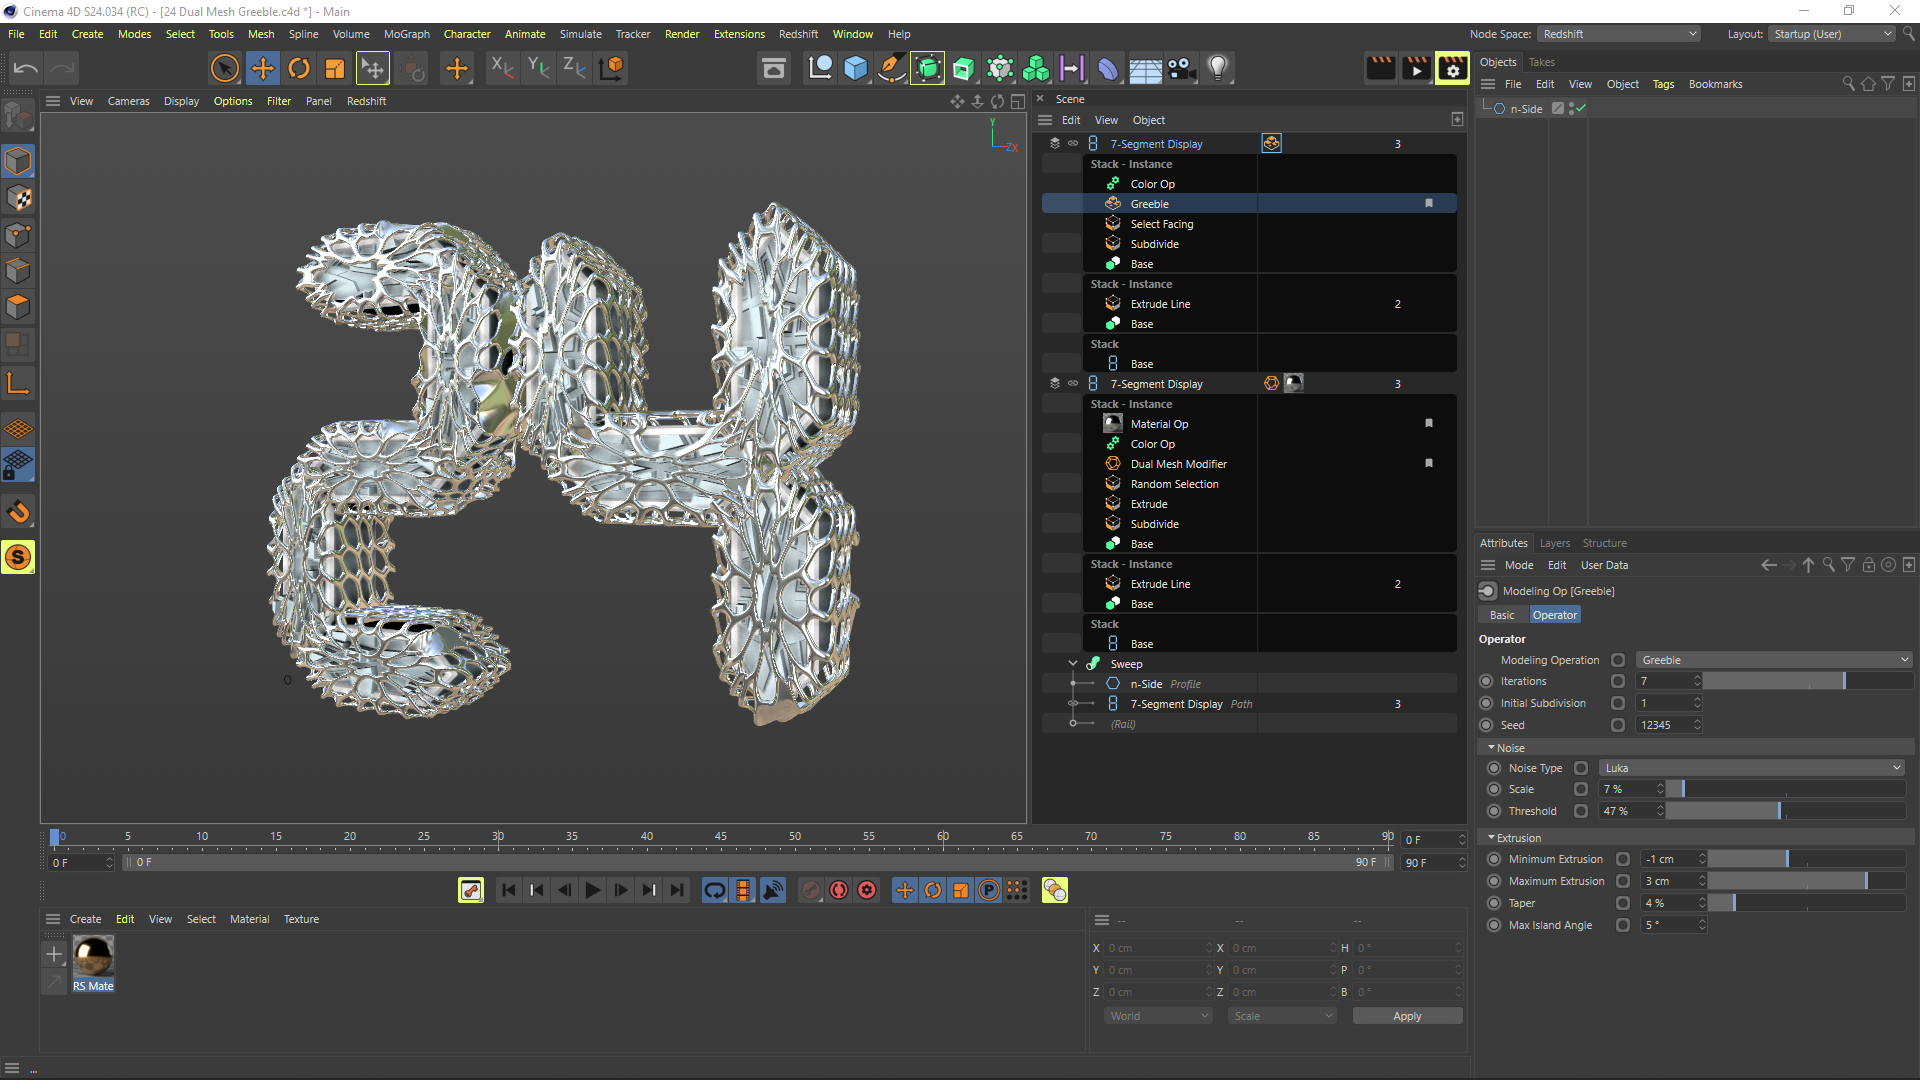 Cinema 4D S24 introduces the Scene Manager, the spiritual successor to Cinema 4D's Classic Object Manager.